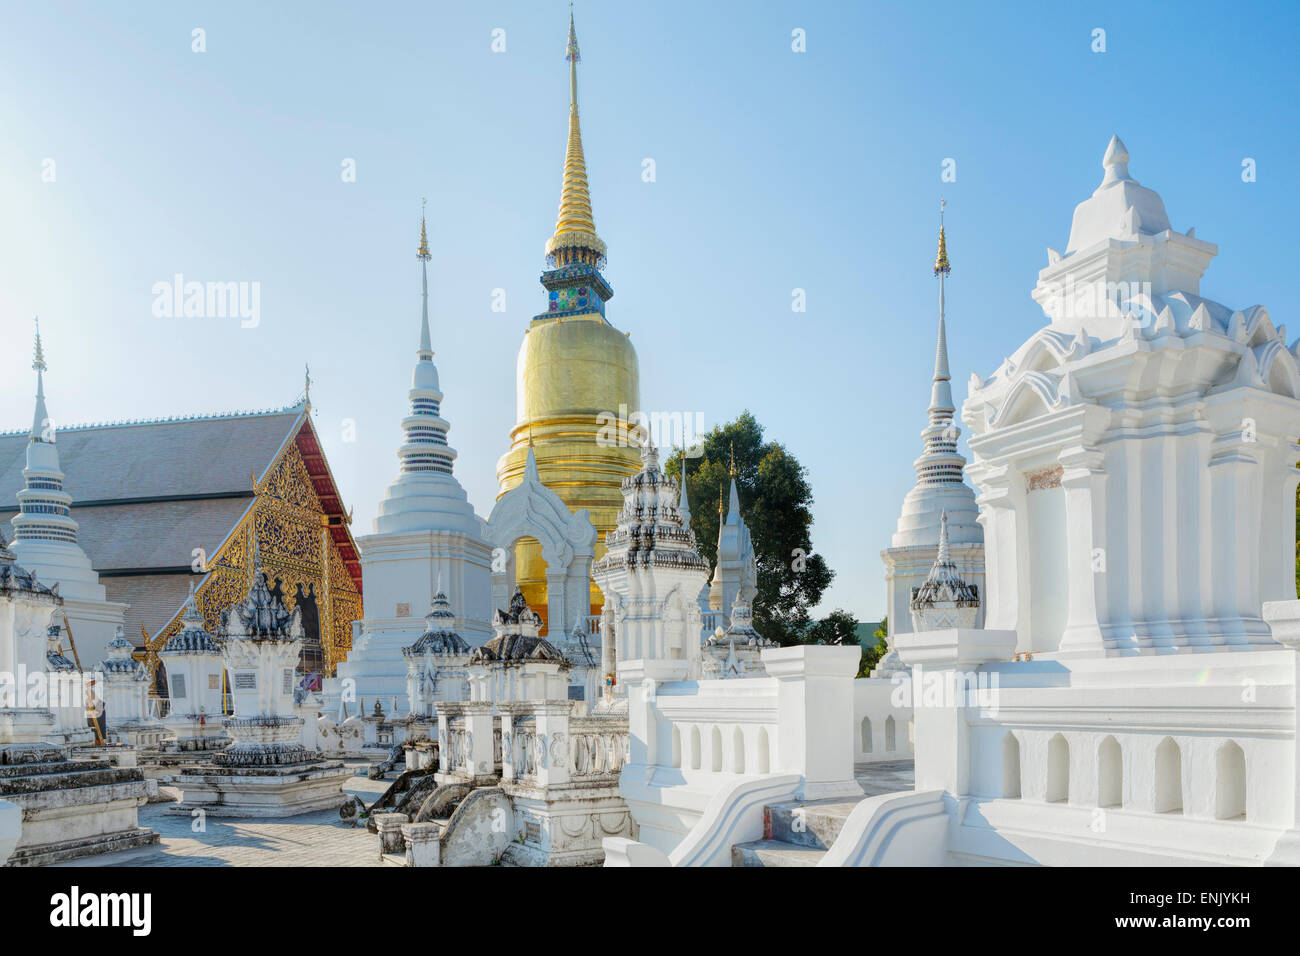 Chedis (stupas) at the temple of Wat Suan Dok, Chiang Mai, Thailand, Southeast Asia, Asia Stock Photo